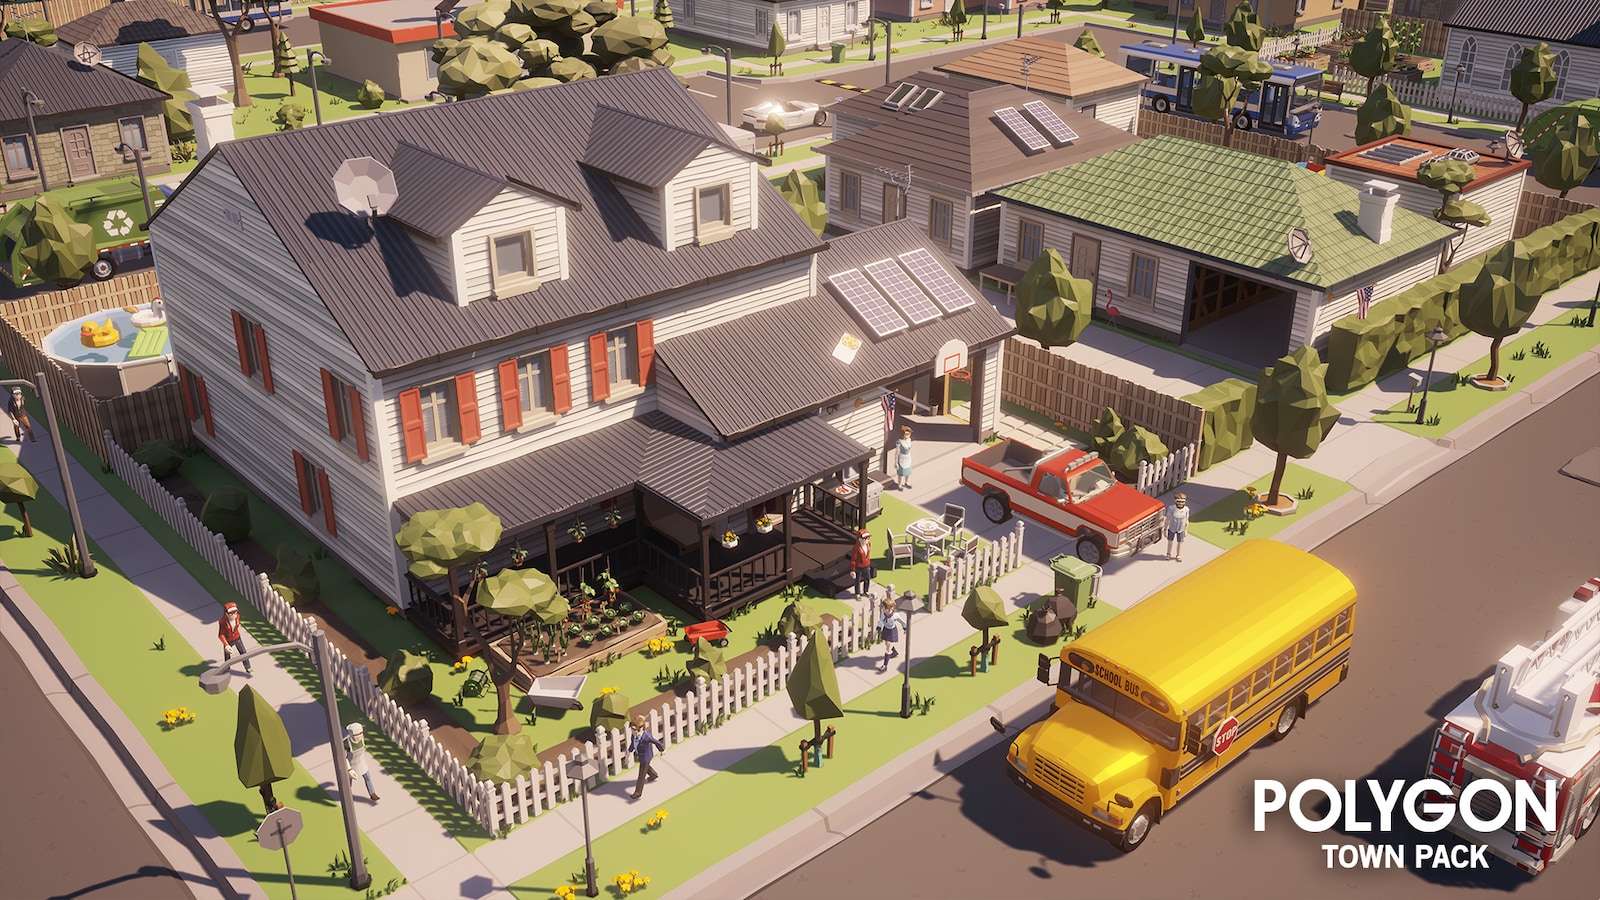 POLYGON Town Pack